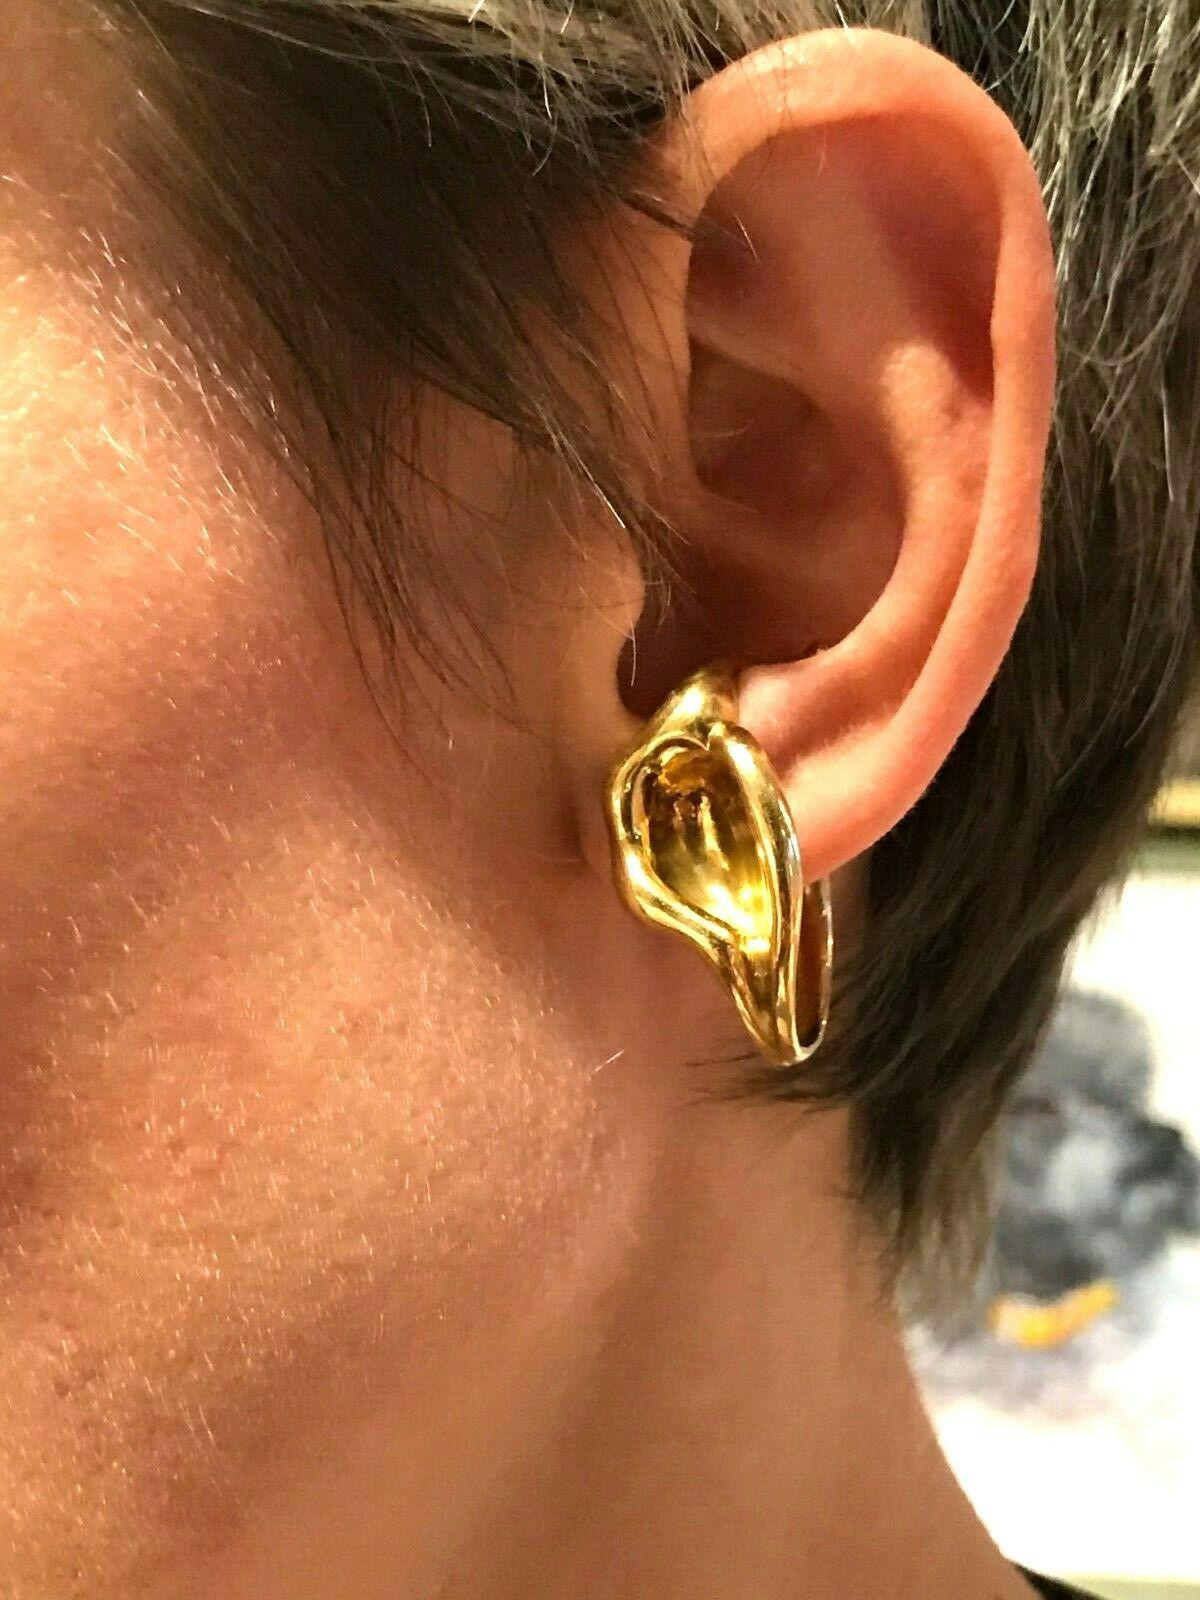 Rare earrings by Elsa Peretti for Tiffany&Co. Nice fluid shape and ear cuff closure  (see the pics for details) make them a truly outstanding jewelry piece.
Stamped with the Elsa Peretti and Tiffany&Co makers' marks and a hallmark for 18k